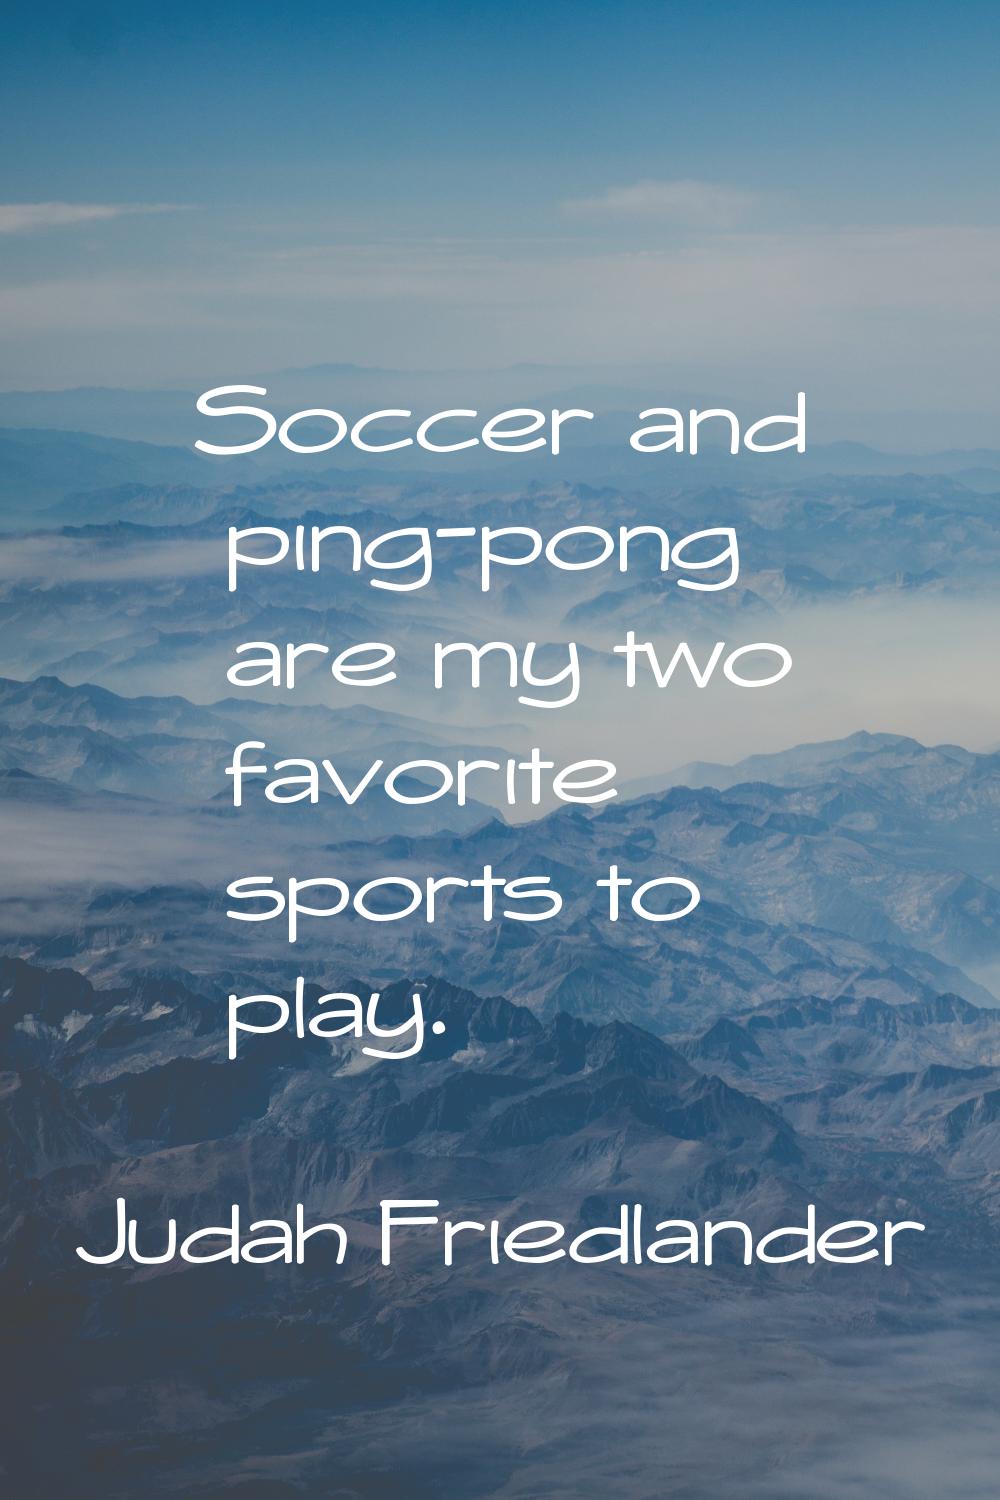 Soccer and ping-pong are my two favorite sports to play.